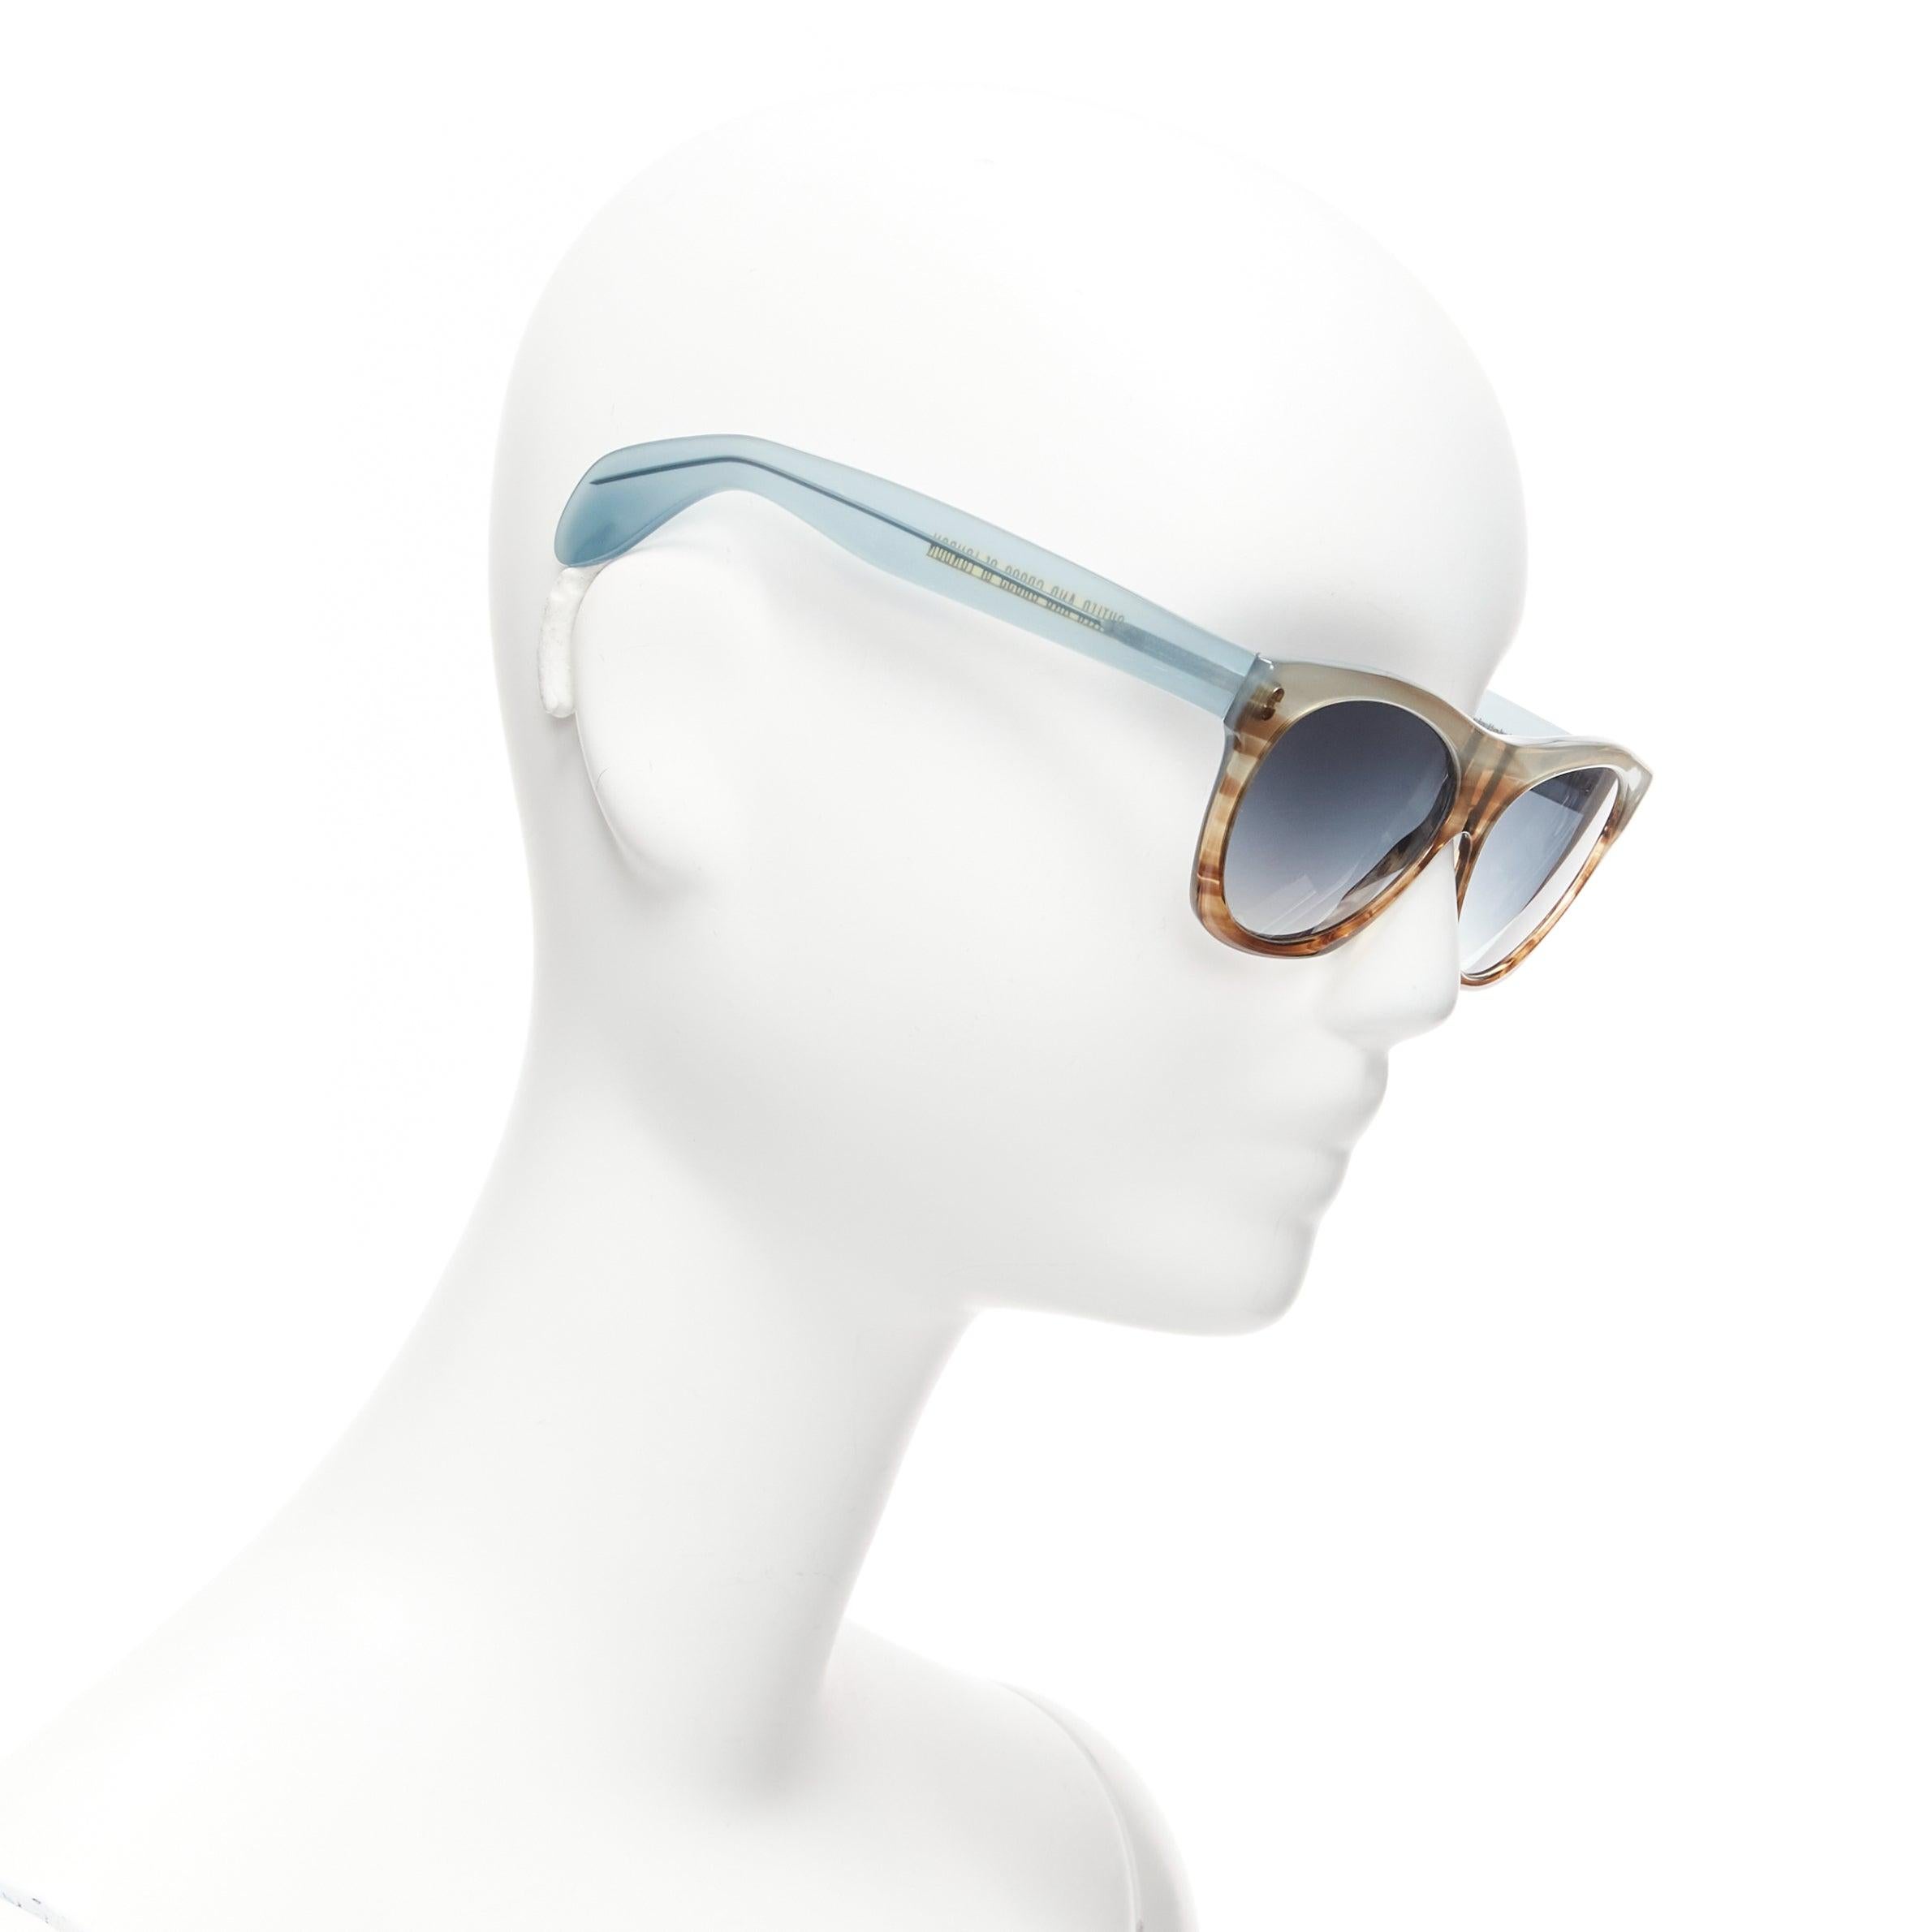 CUTLER AND GROSS 0164 Obtur blue brown gradient frame blue lens sunglasses
Reference: NKLL/A00091
Brand: Cutler and Gross
Model: 0174 OBTUR 57 16 145
Material: Plastic
Color: Blue, Brown
Pattern: Solid
Made in: Italy

CONDITION:
Condition: